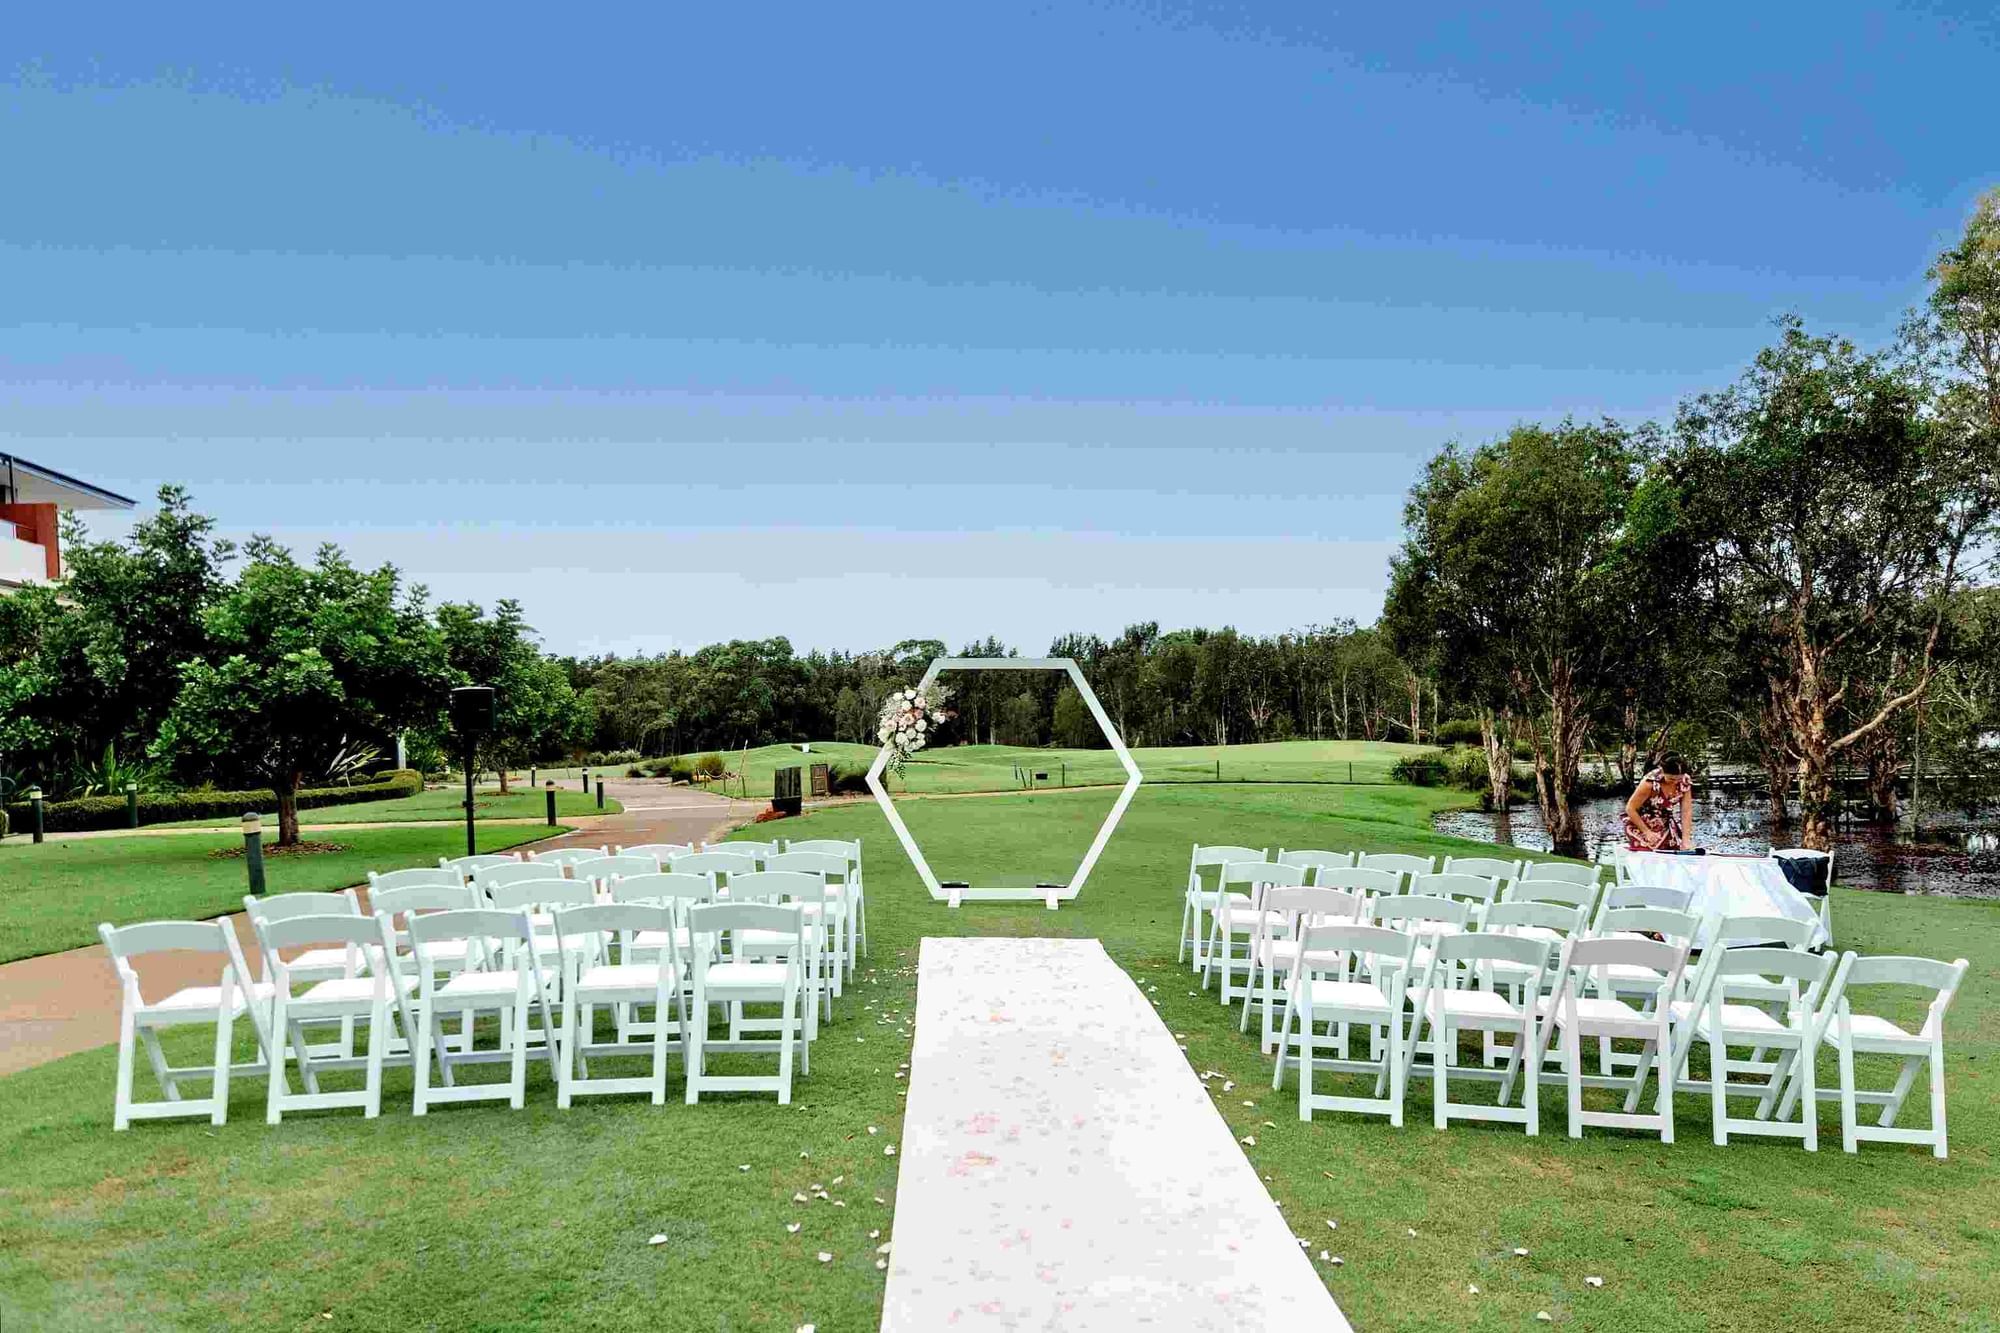 Central coast wedding venue with beautiful views of golf course